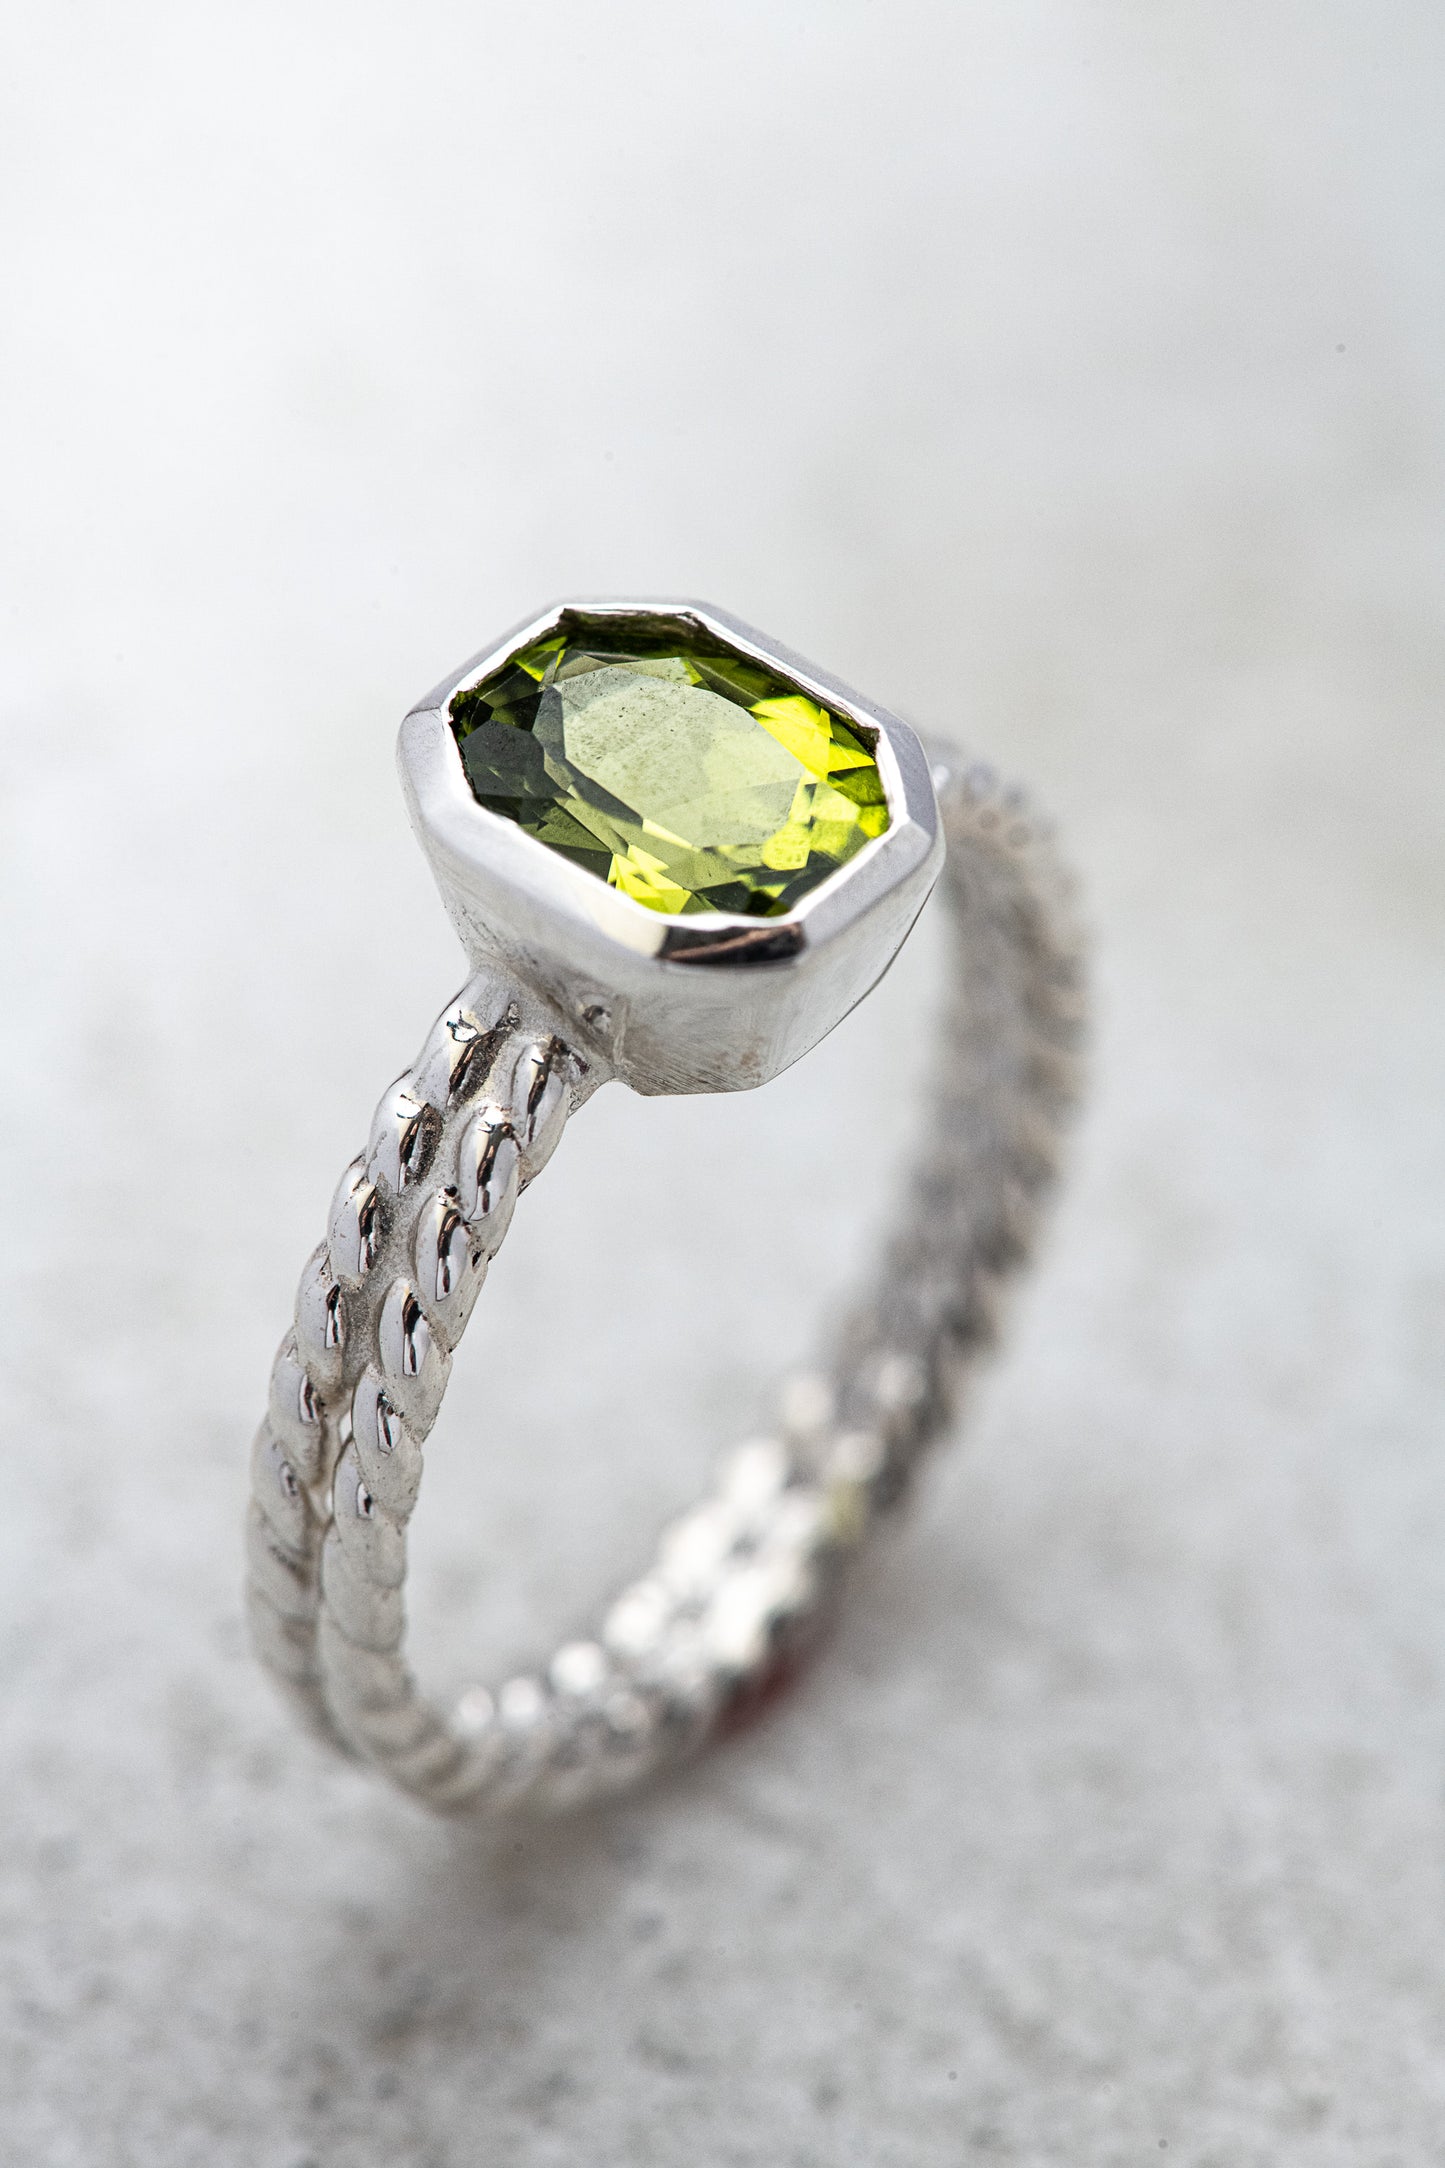 A handmade sterling silver ring with a One of a Kind Peridot stone.